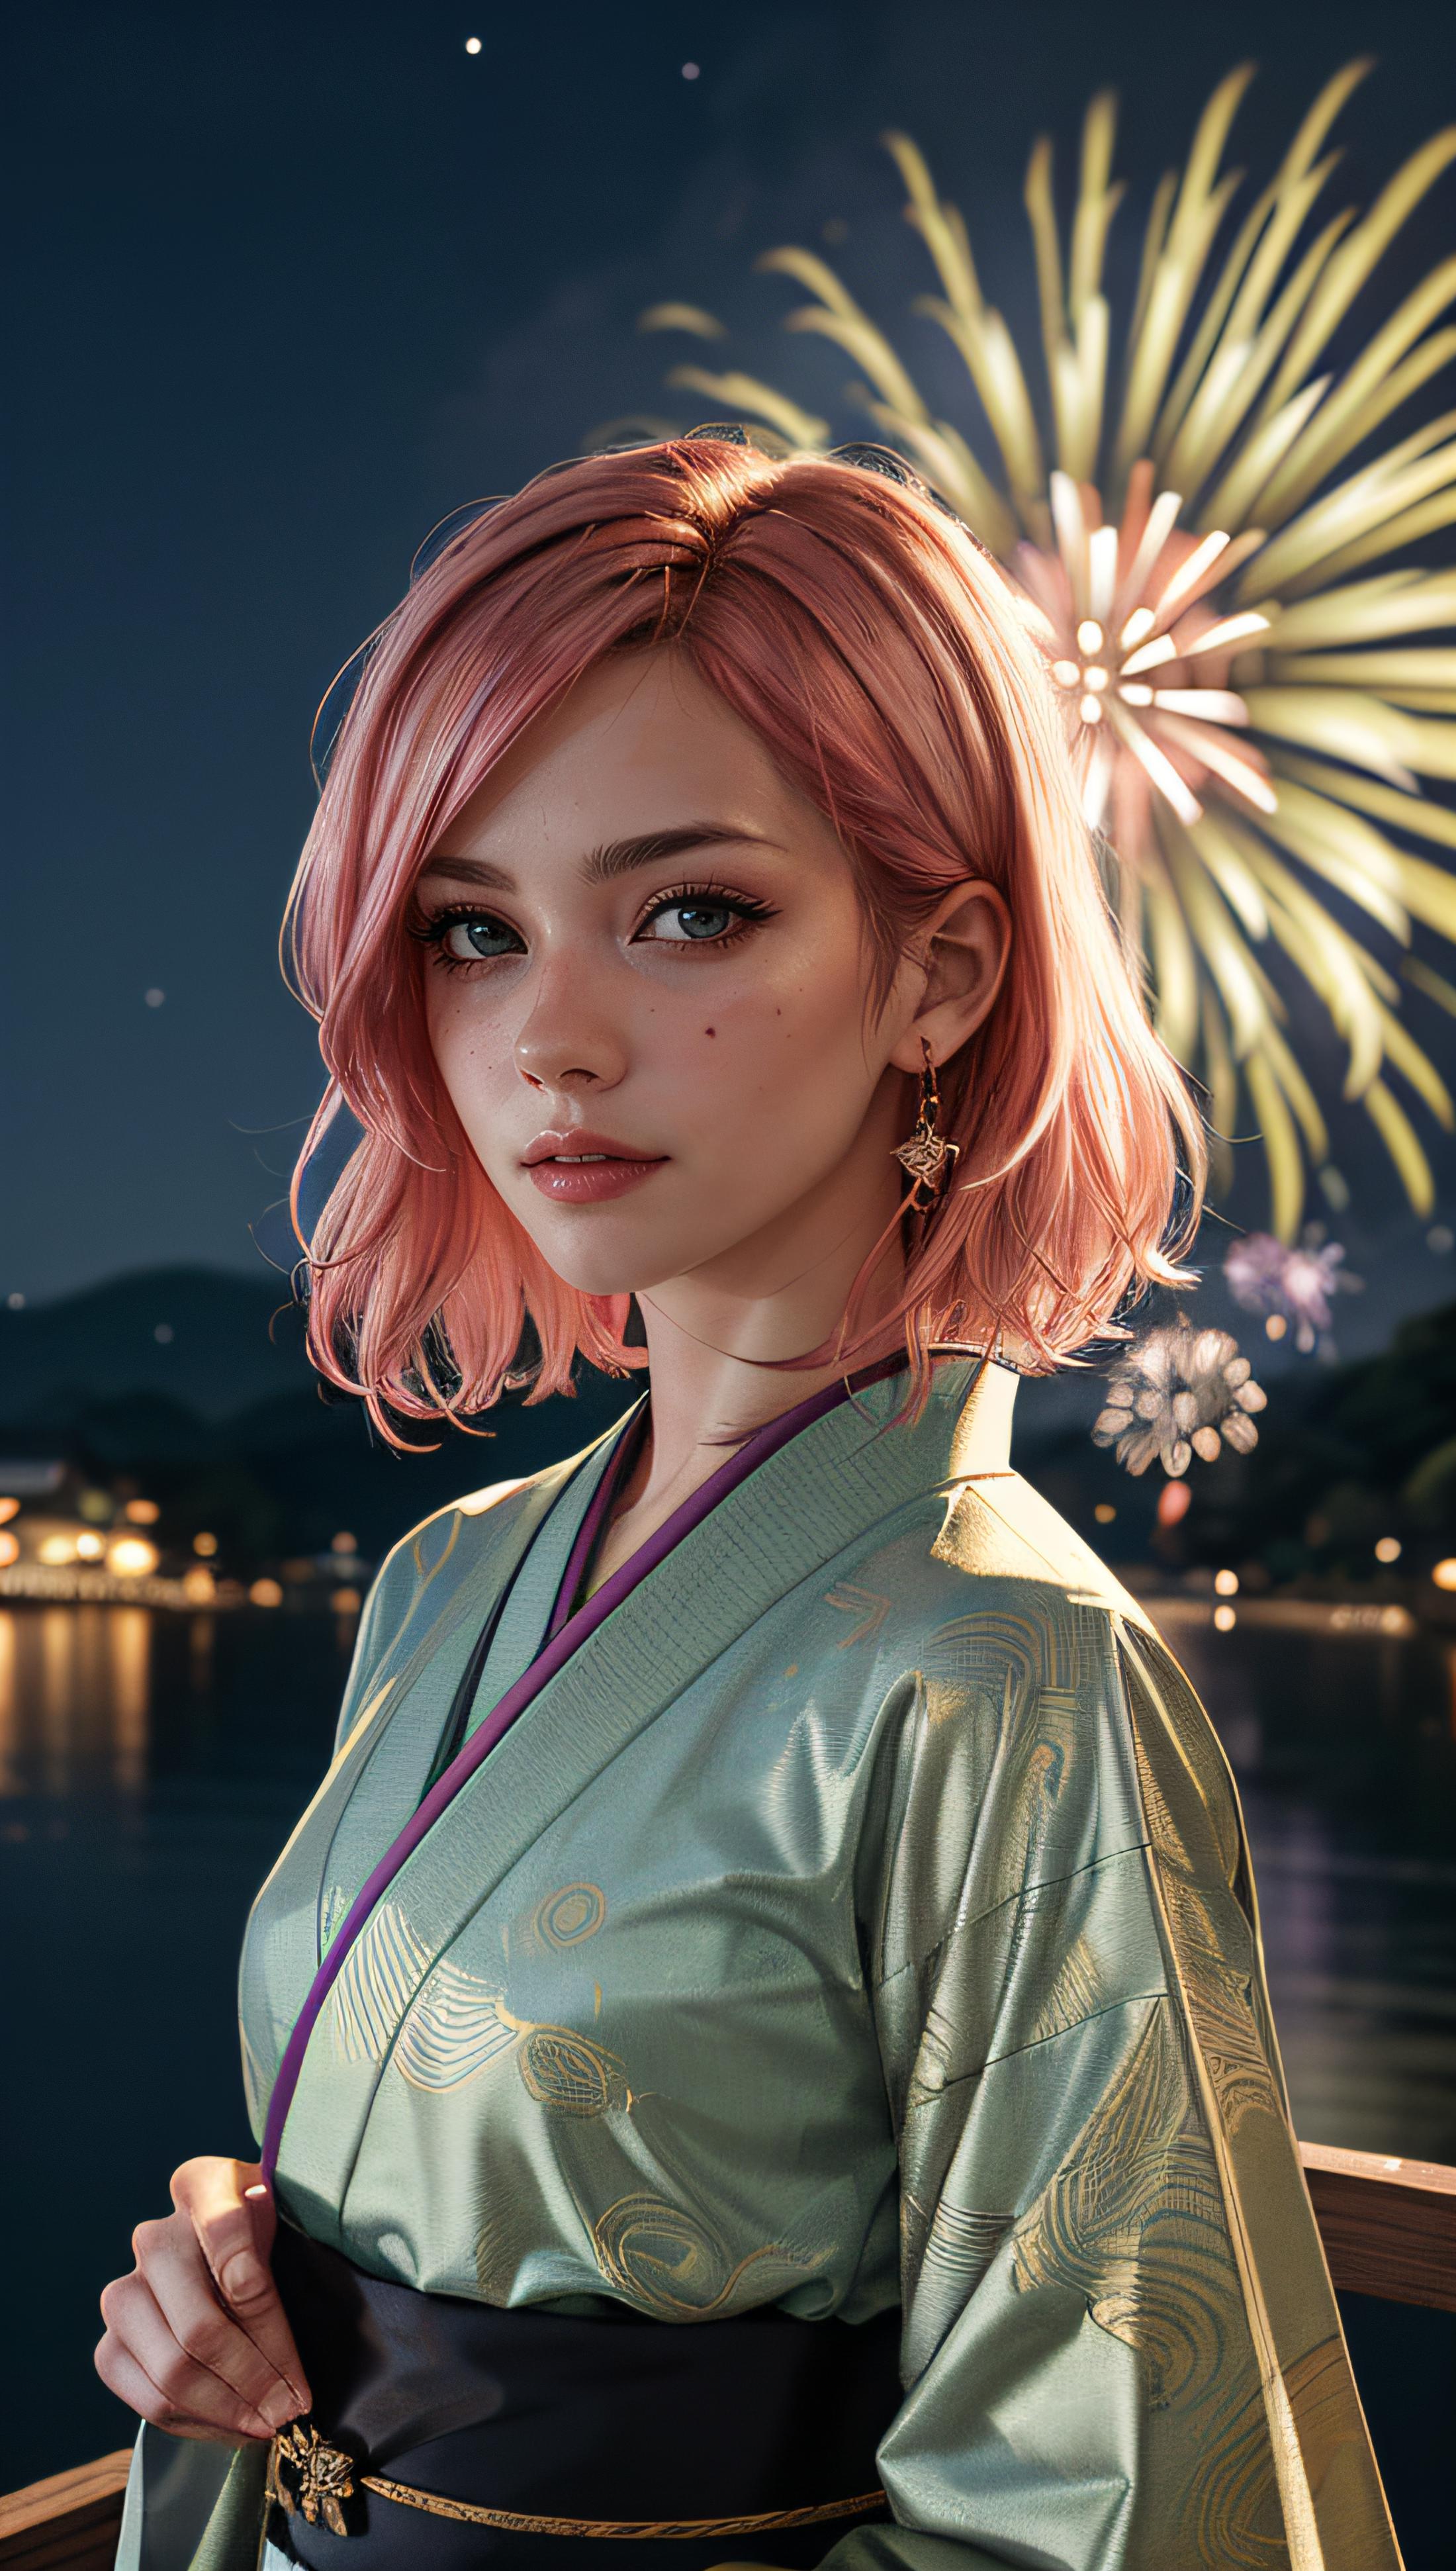 Pink-Haired Woman in a Kimono Standing by the Water with Fireworks in the Background